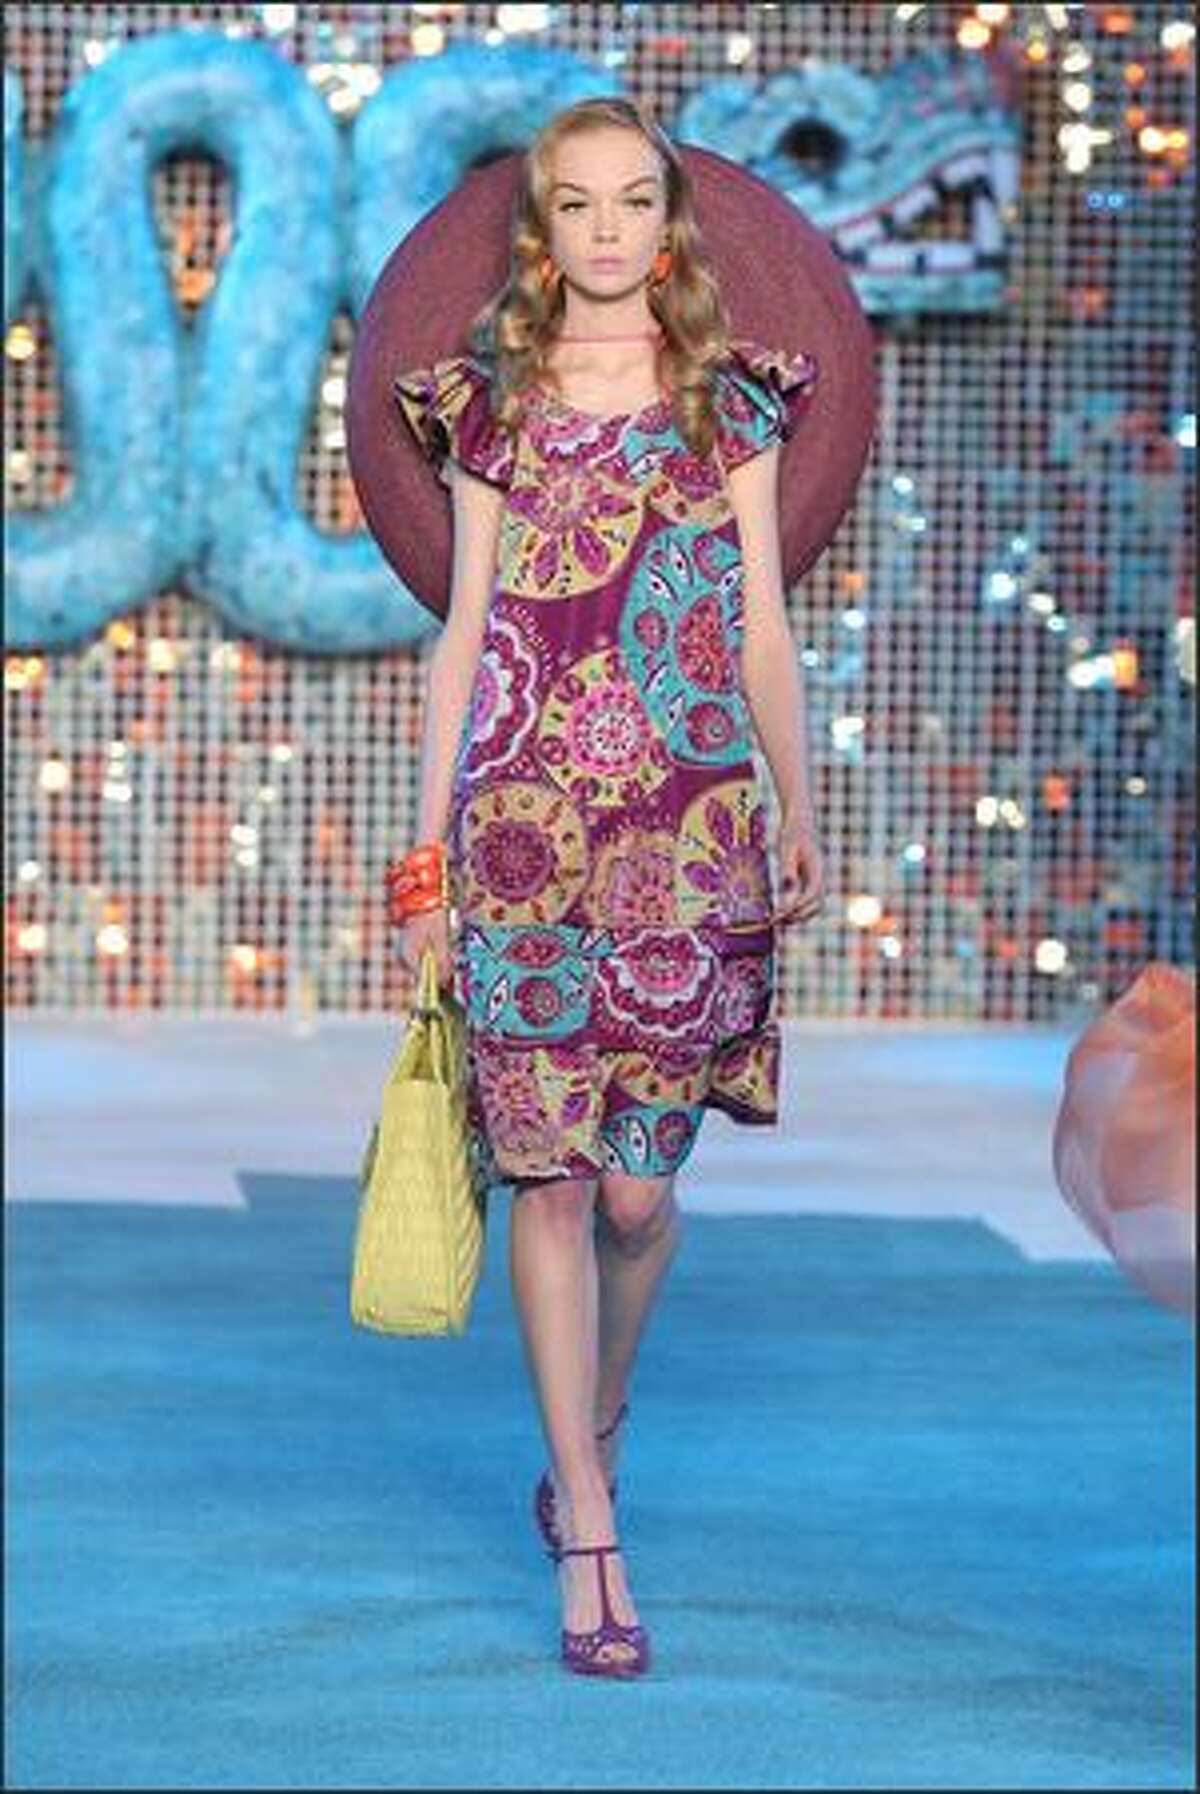 A model walks the runway during the Christian Dior Cruise 2009 Collection at Gustavino's on Monday in New York City.